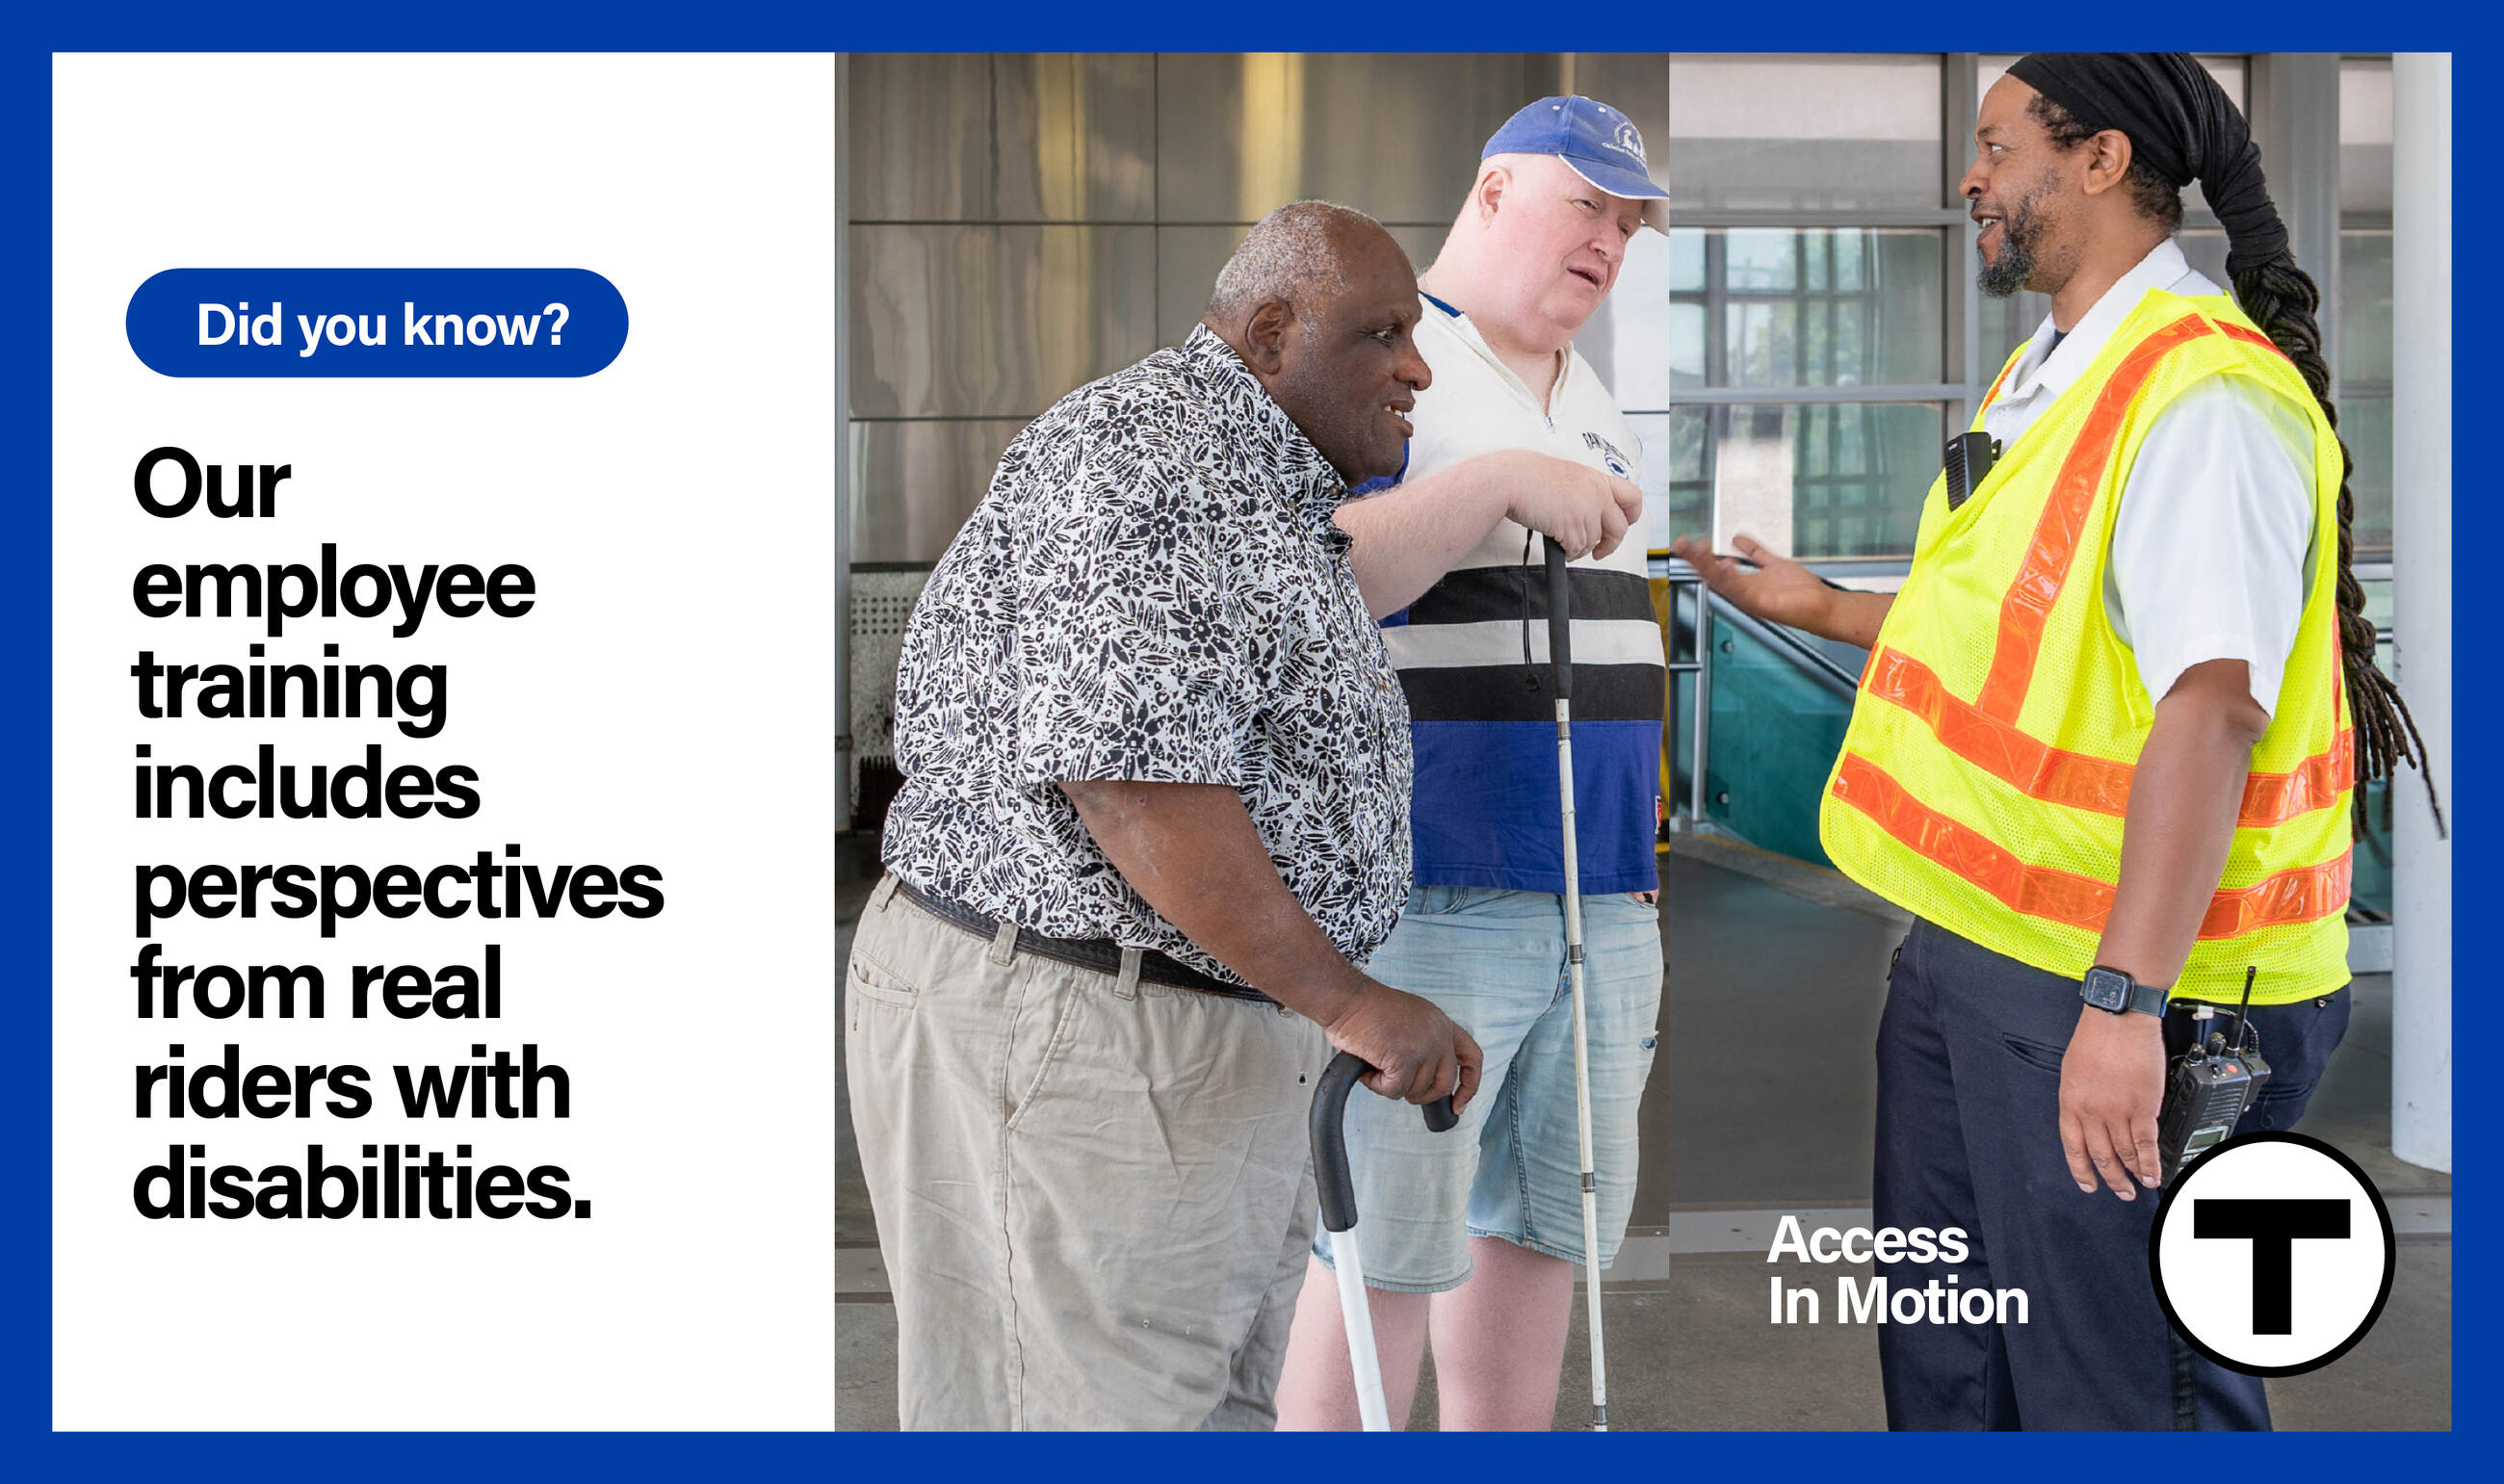 Spanning the center and right panels: A white man using a white cane and an African American man using a white support cane are conversing with an MBTA employee, an African American man with light facial hair and wearing a yellow safety vest. Left panel (text): “Did you know? Our employee training includes perspectives from real riders with disabilities.” followed by the “Access In Motion” tagline and the T logo.